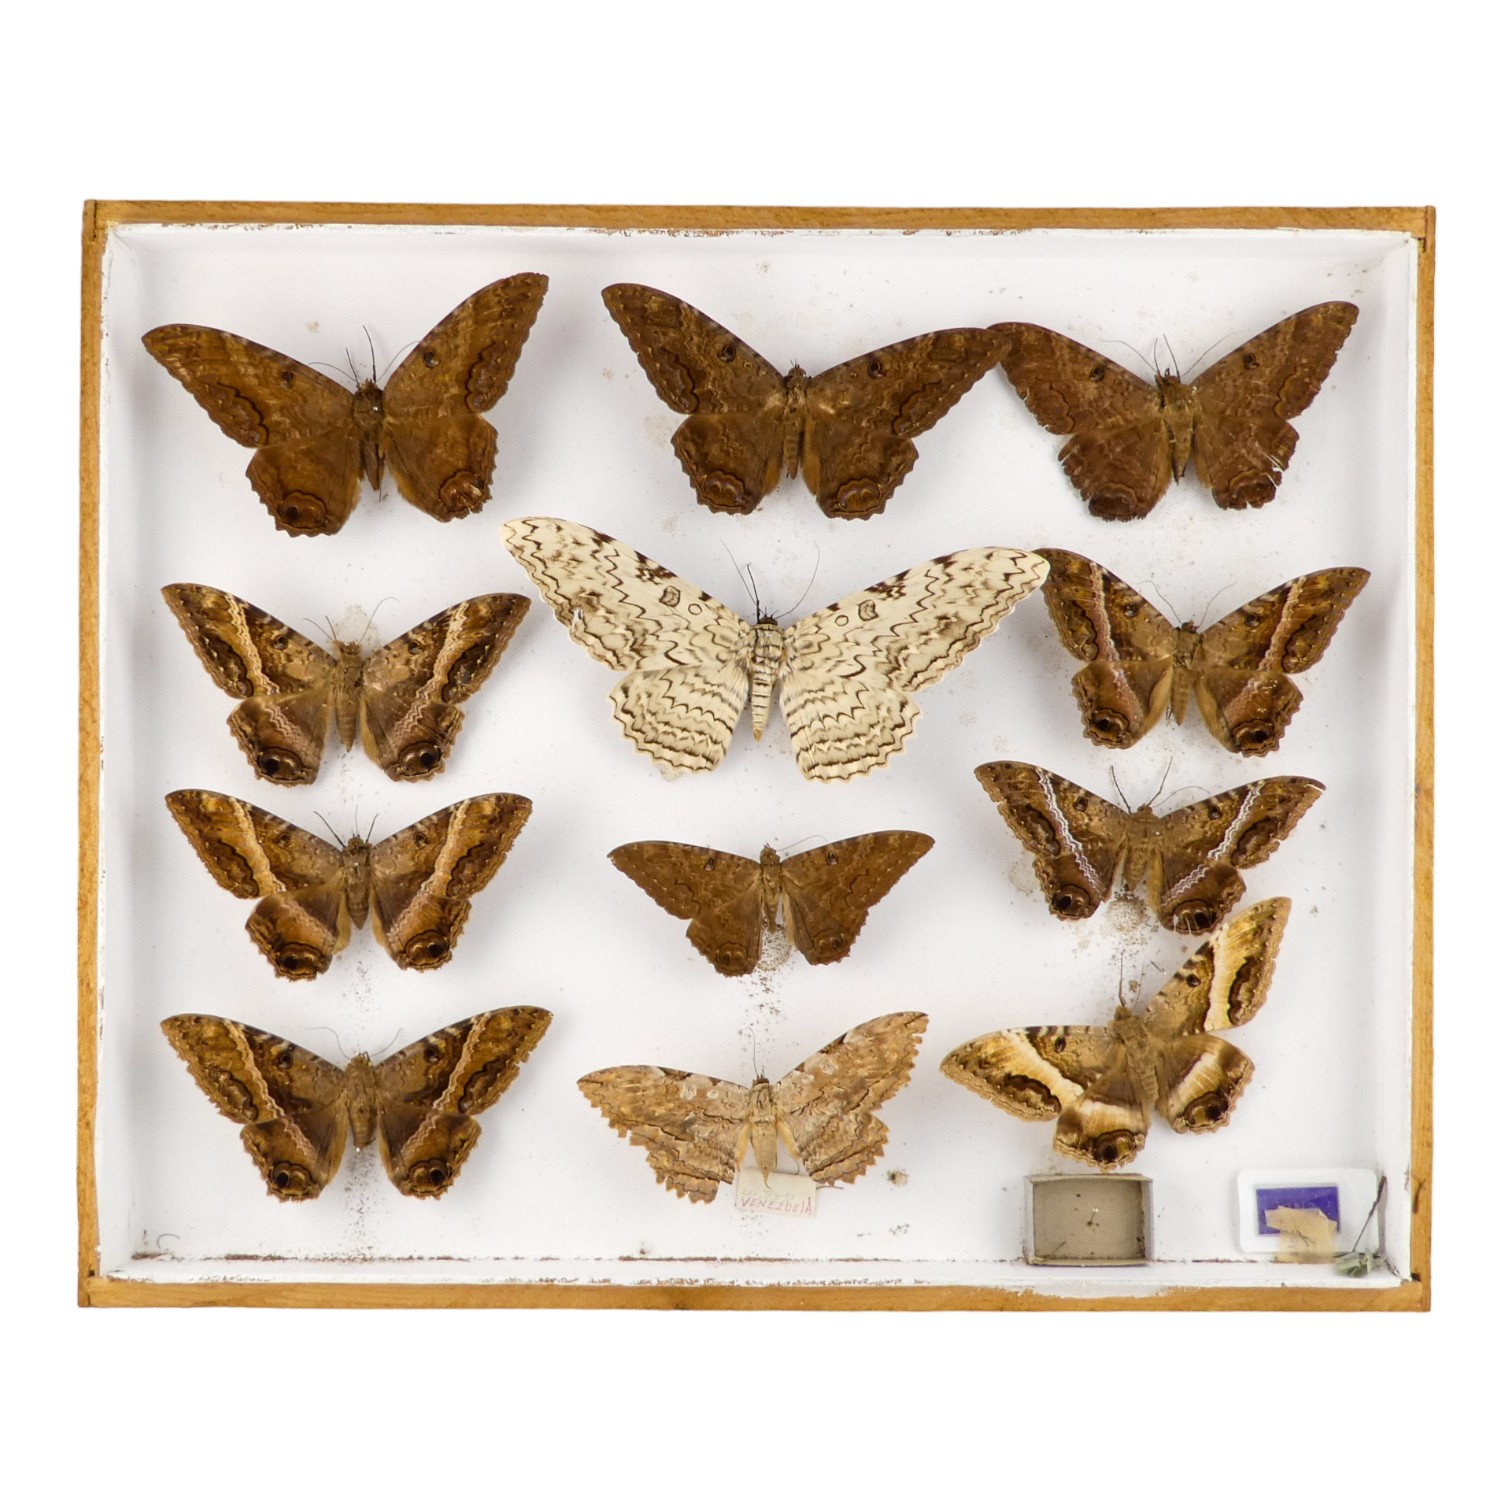 A case of twelve moths - including Black Witch and White Witch examples